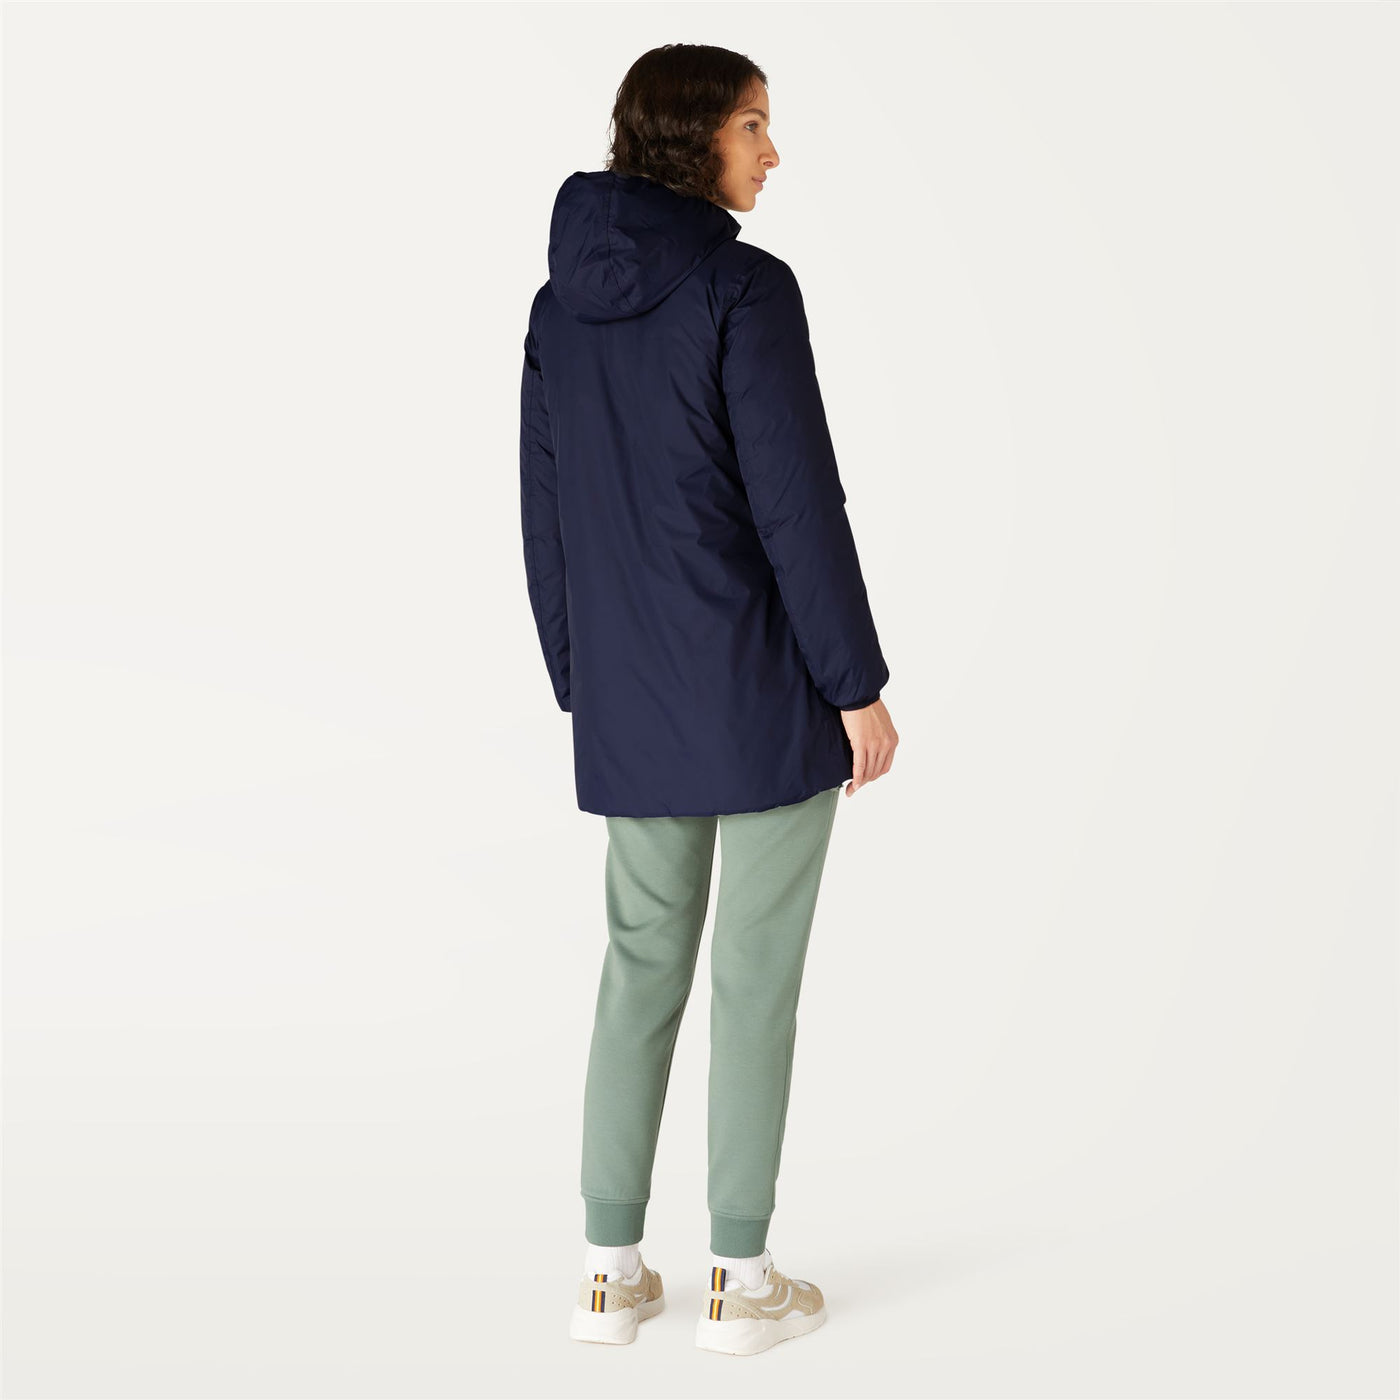 Jackets Woman SOPHIE THERMO PLUS.2 DOUBLE Mid BLUE DEPTH - GREEN LAUREL Dressed Front Double		